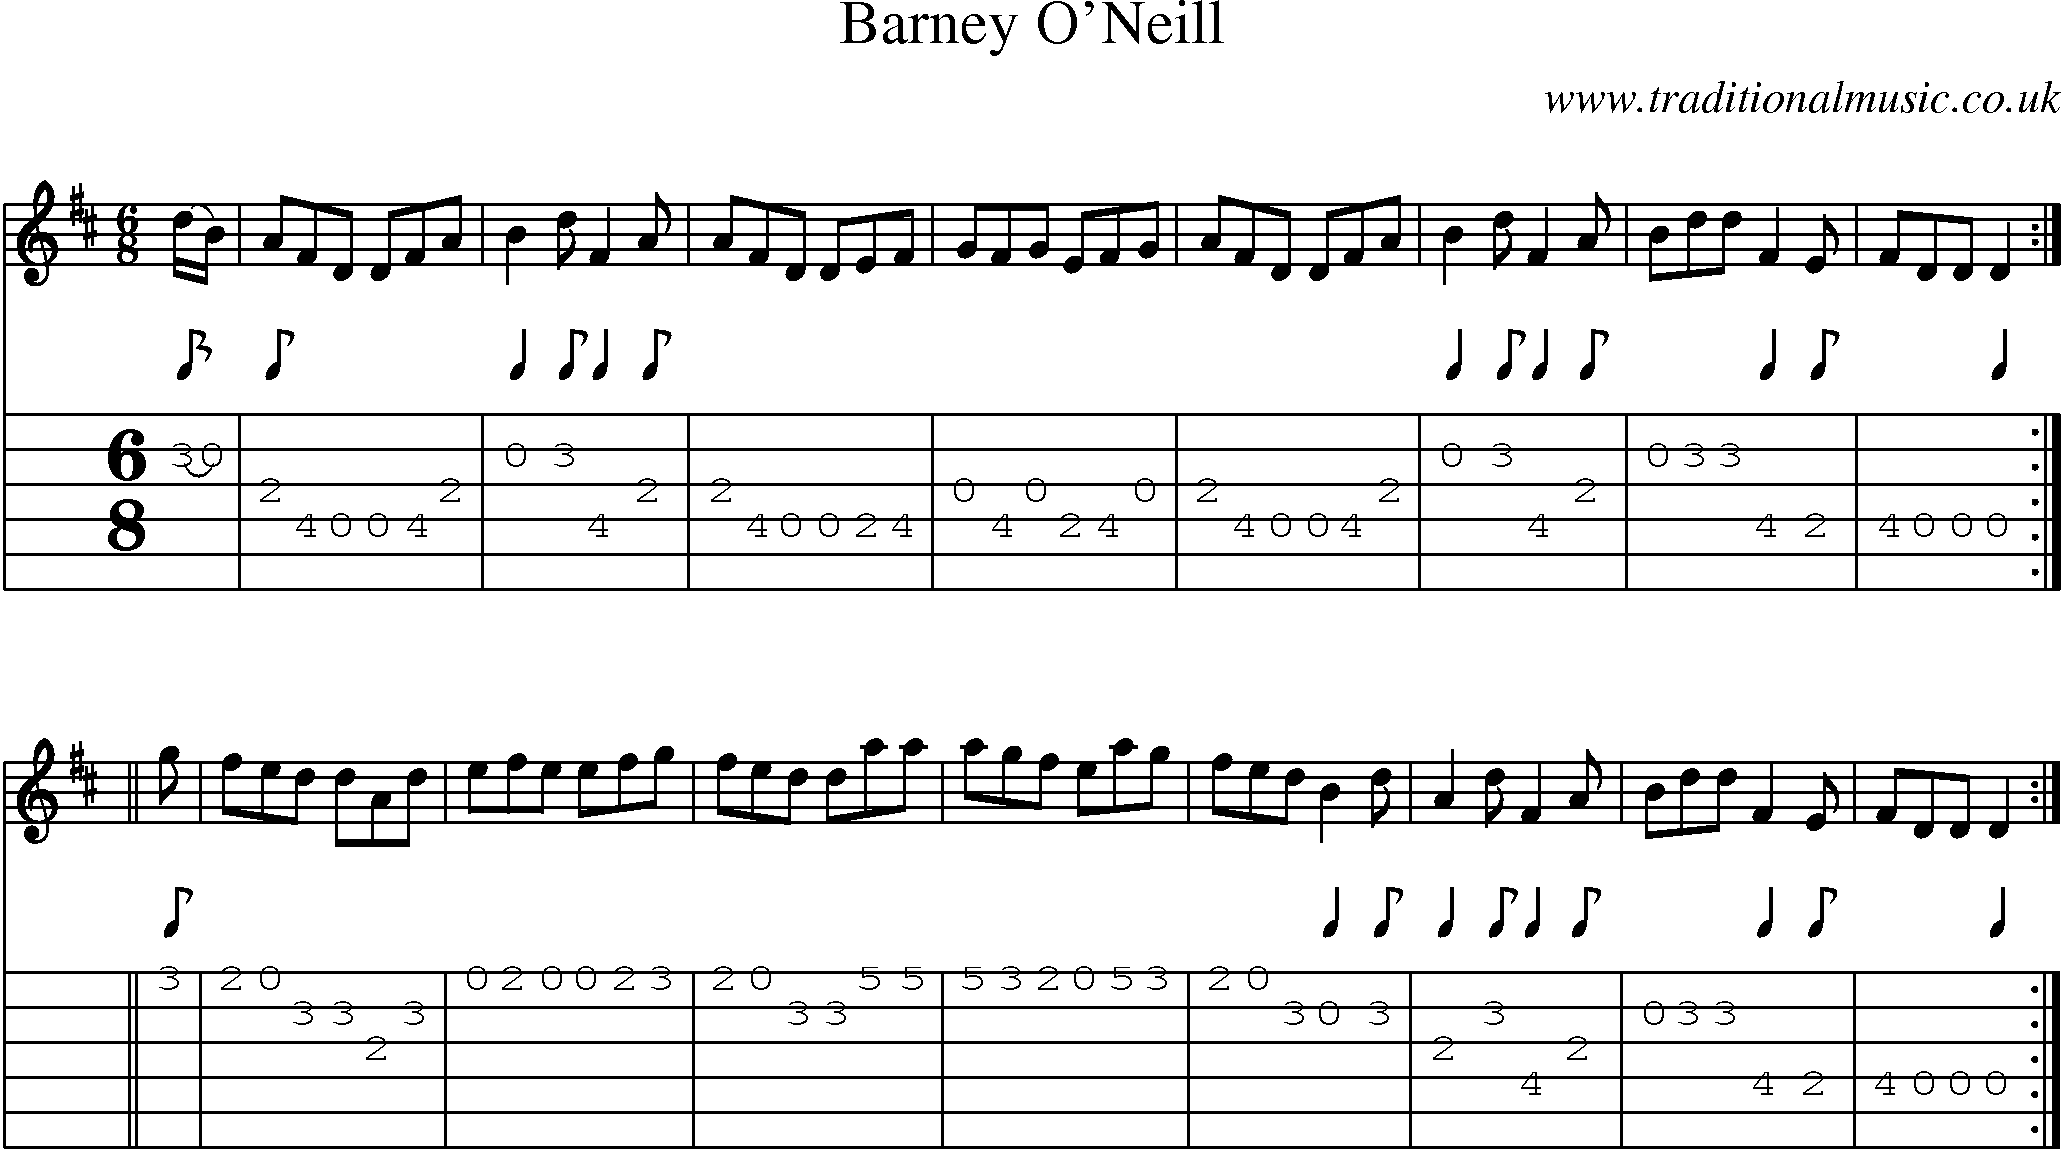 Music Score and Guitar Tabs for Barney O Neill